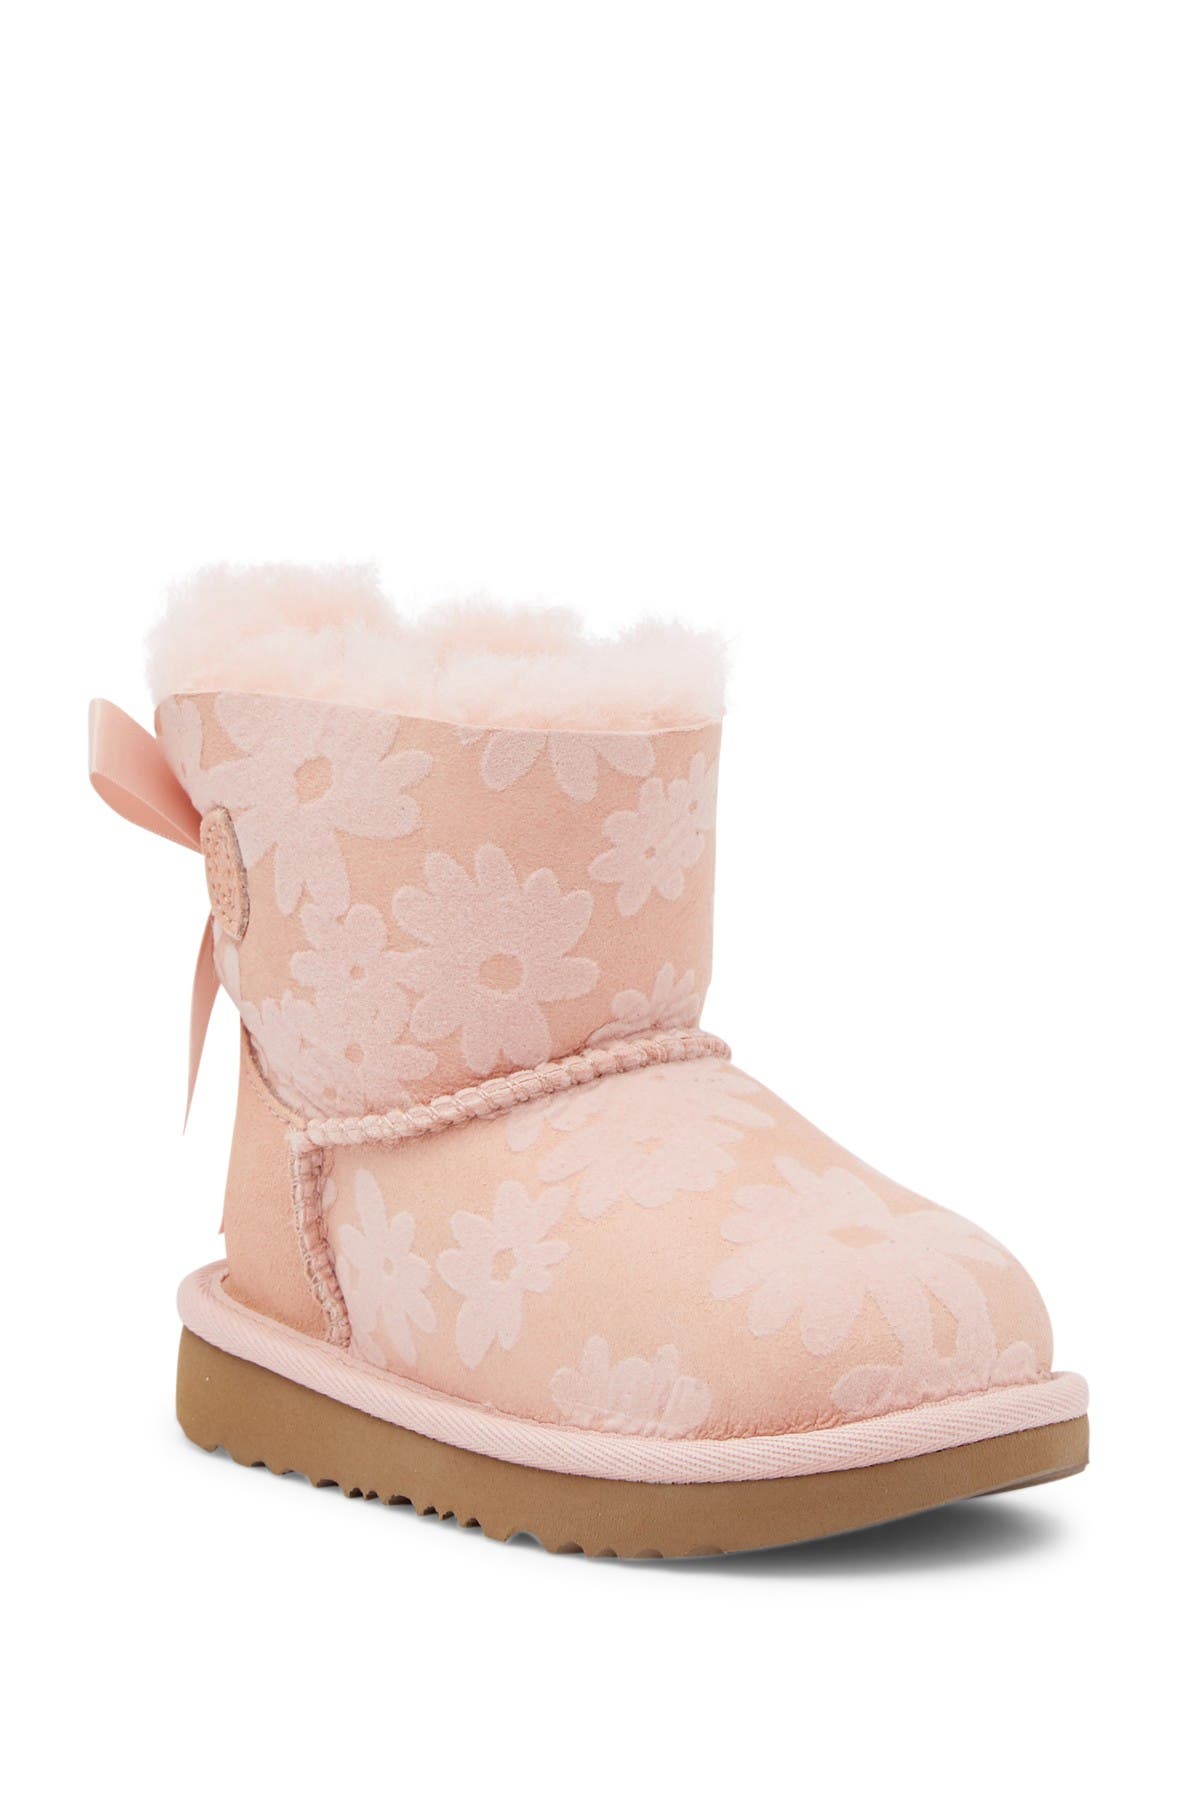 uggs with flowers on them